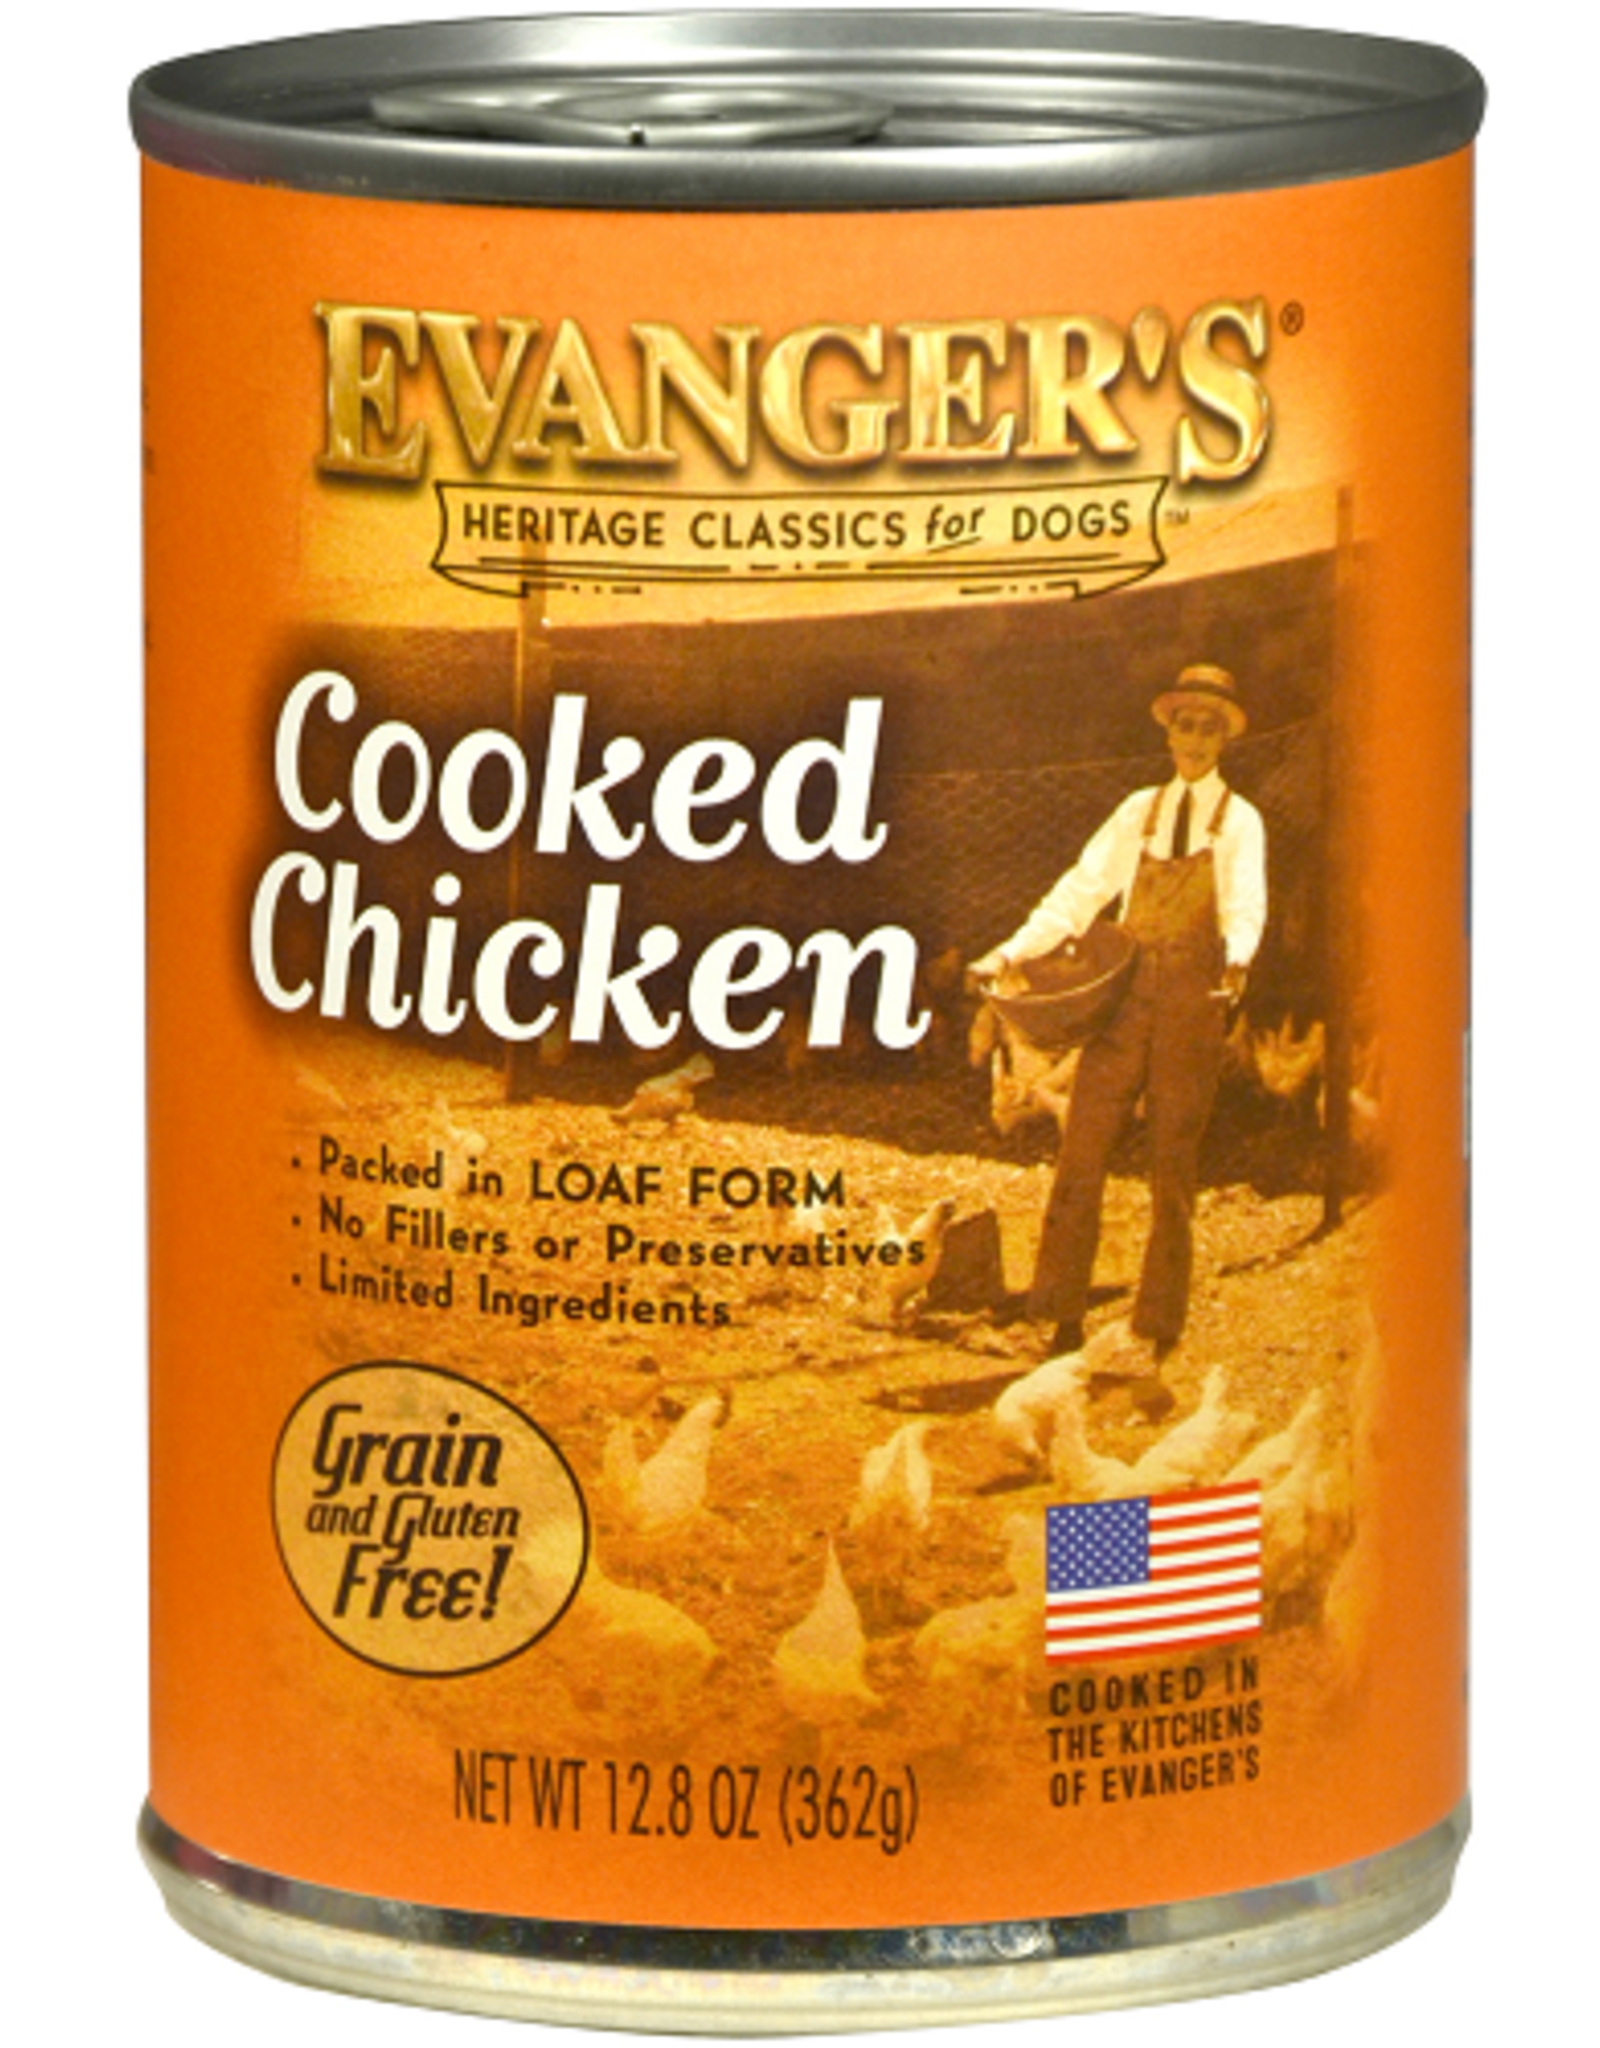 EVANGER'S EVANGERS CLASSIC COOKED CHICKEN 13OZ CASE OF 12